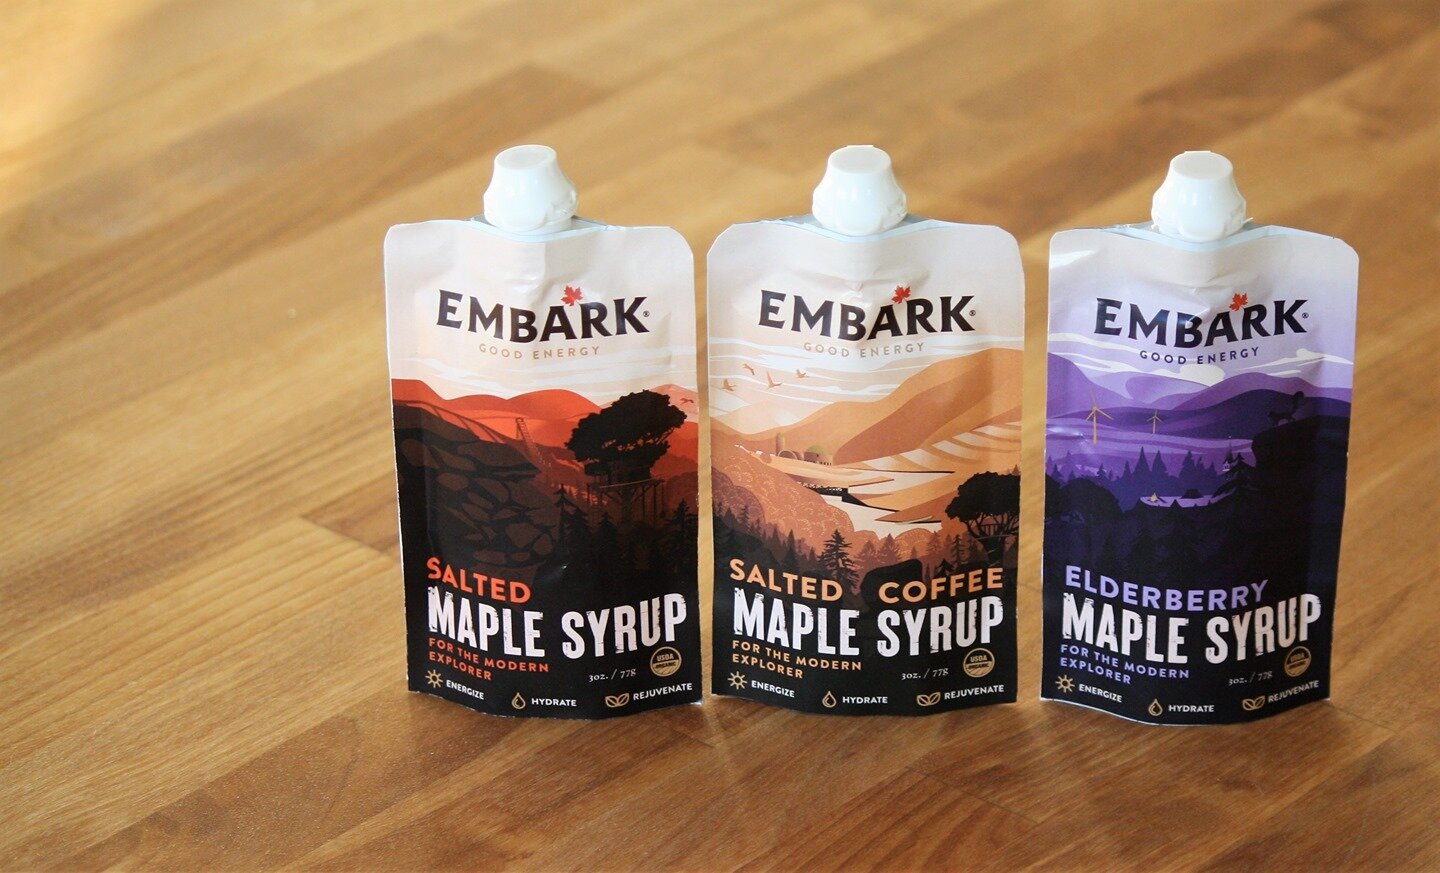 Our Embark Kickstarter is officially live!  After nearly a year of preparing, we can't describe how exciting it is to be so close to the finish line on these Maple Adventure Packs! 

Check out the video to learn more about the origins of Embark, and 